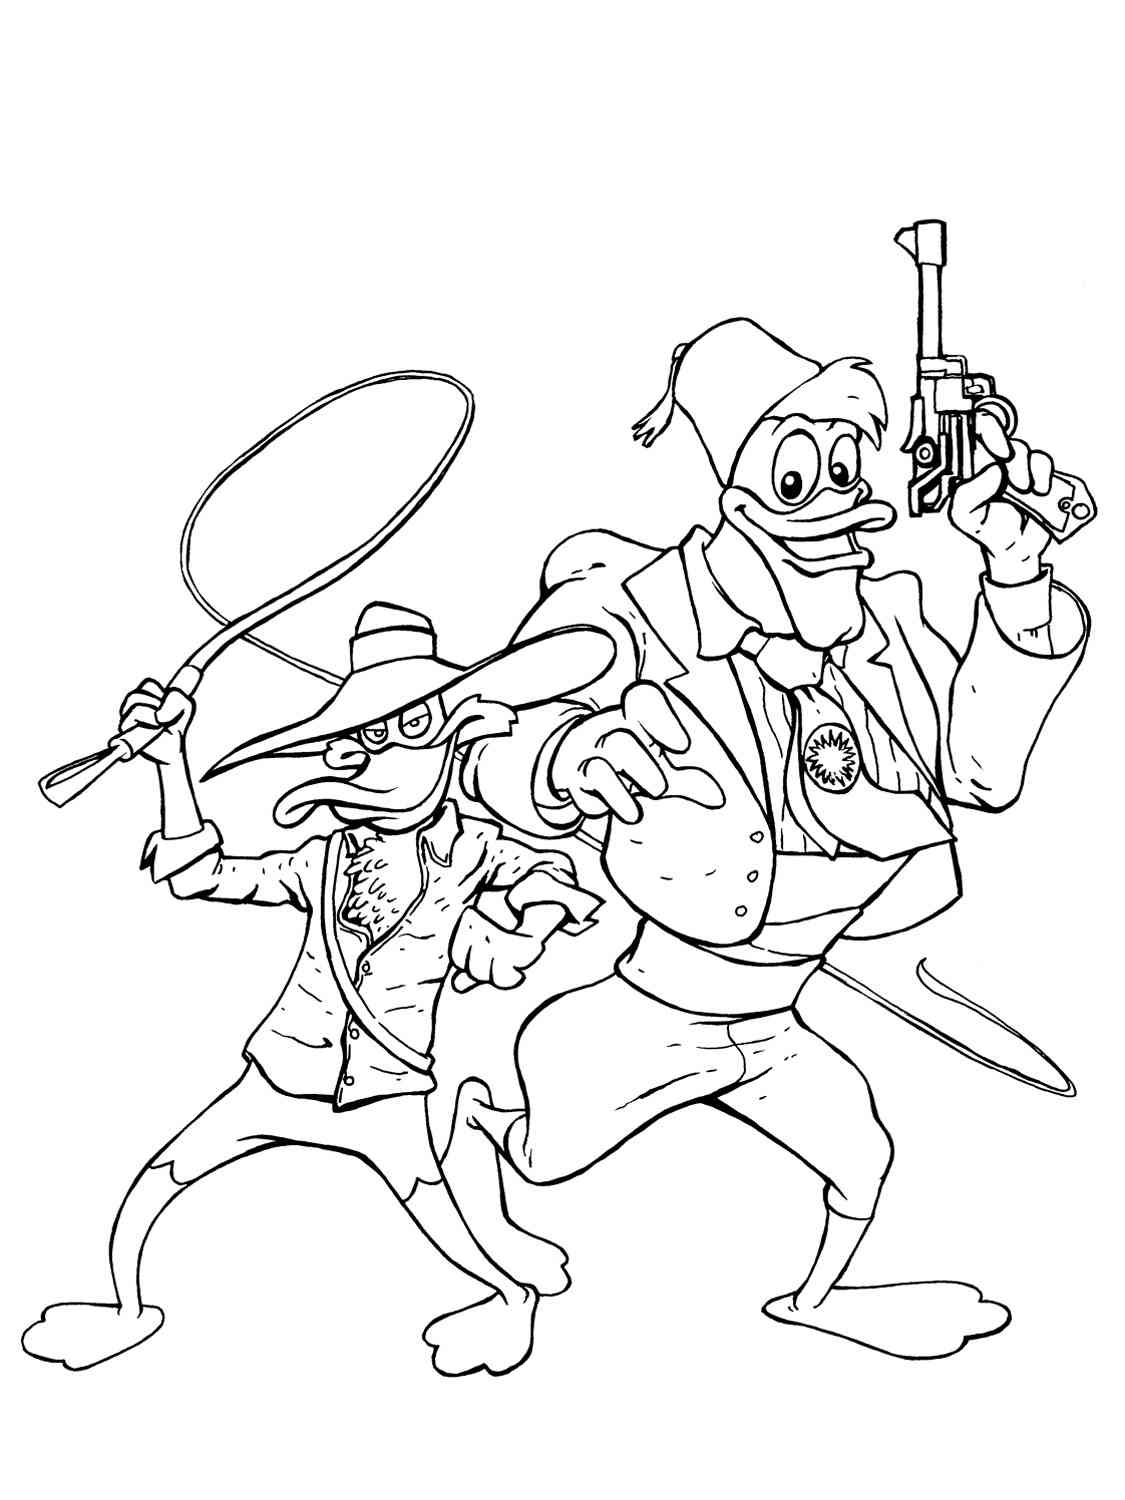 Darkwing Duck 8 coloring page